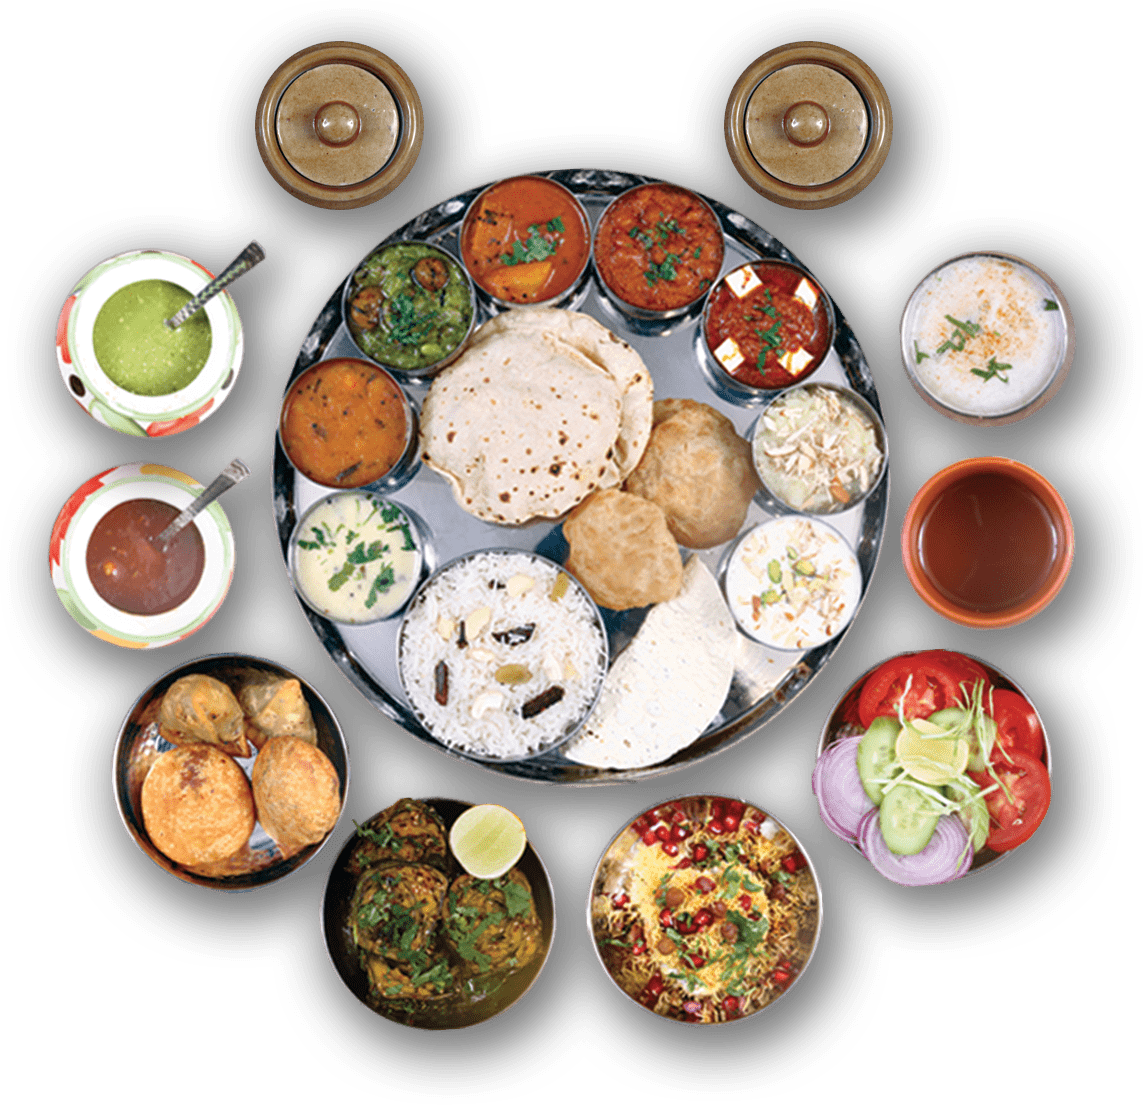 A Plate Of Food With Different Types Of Food In It